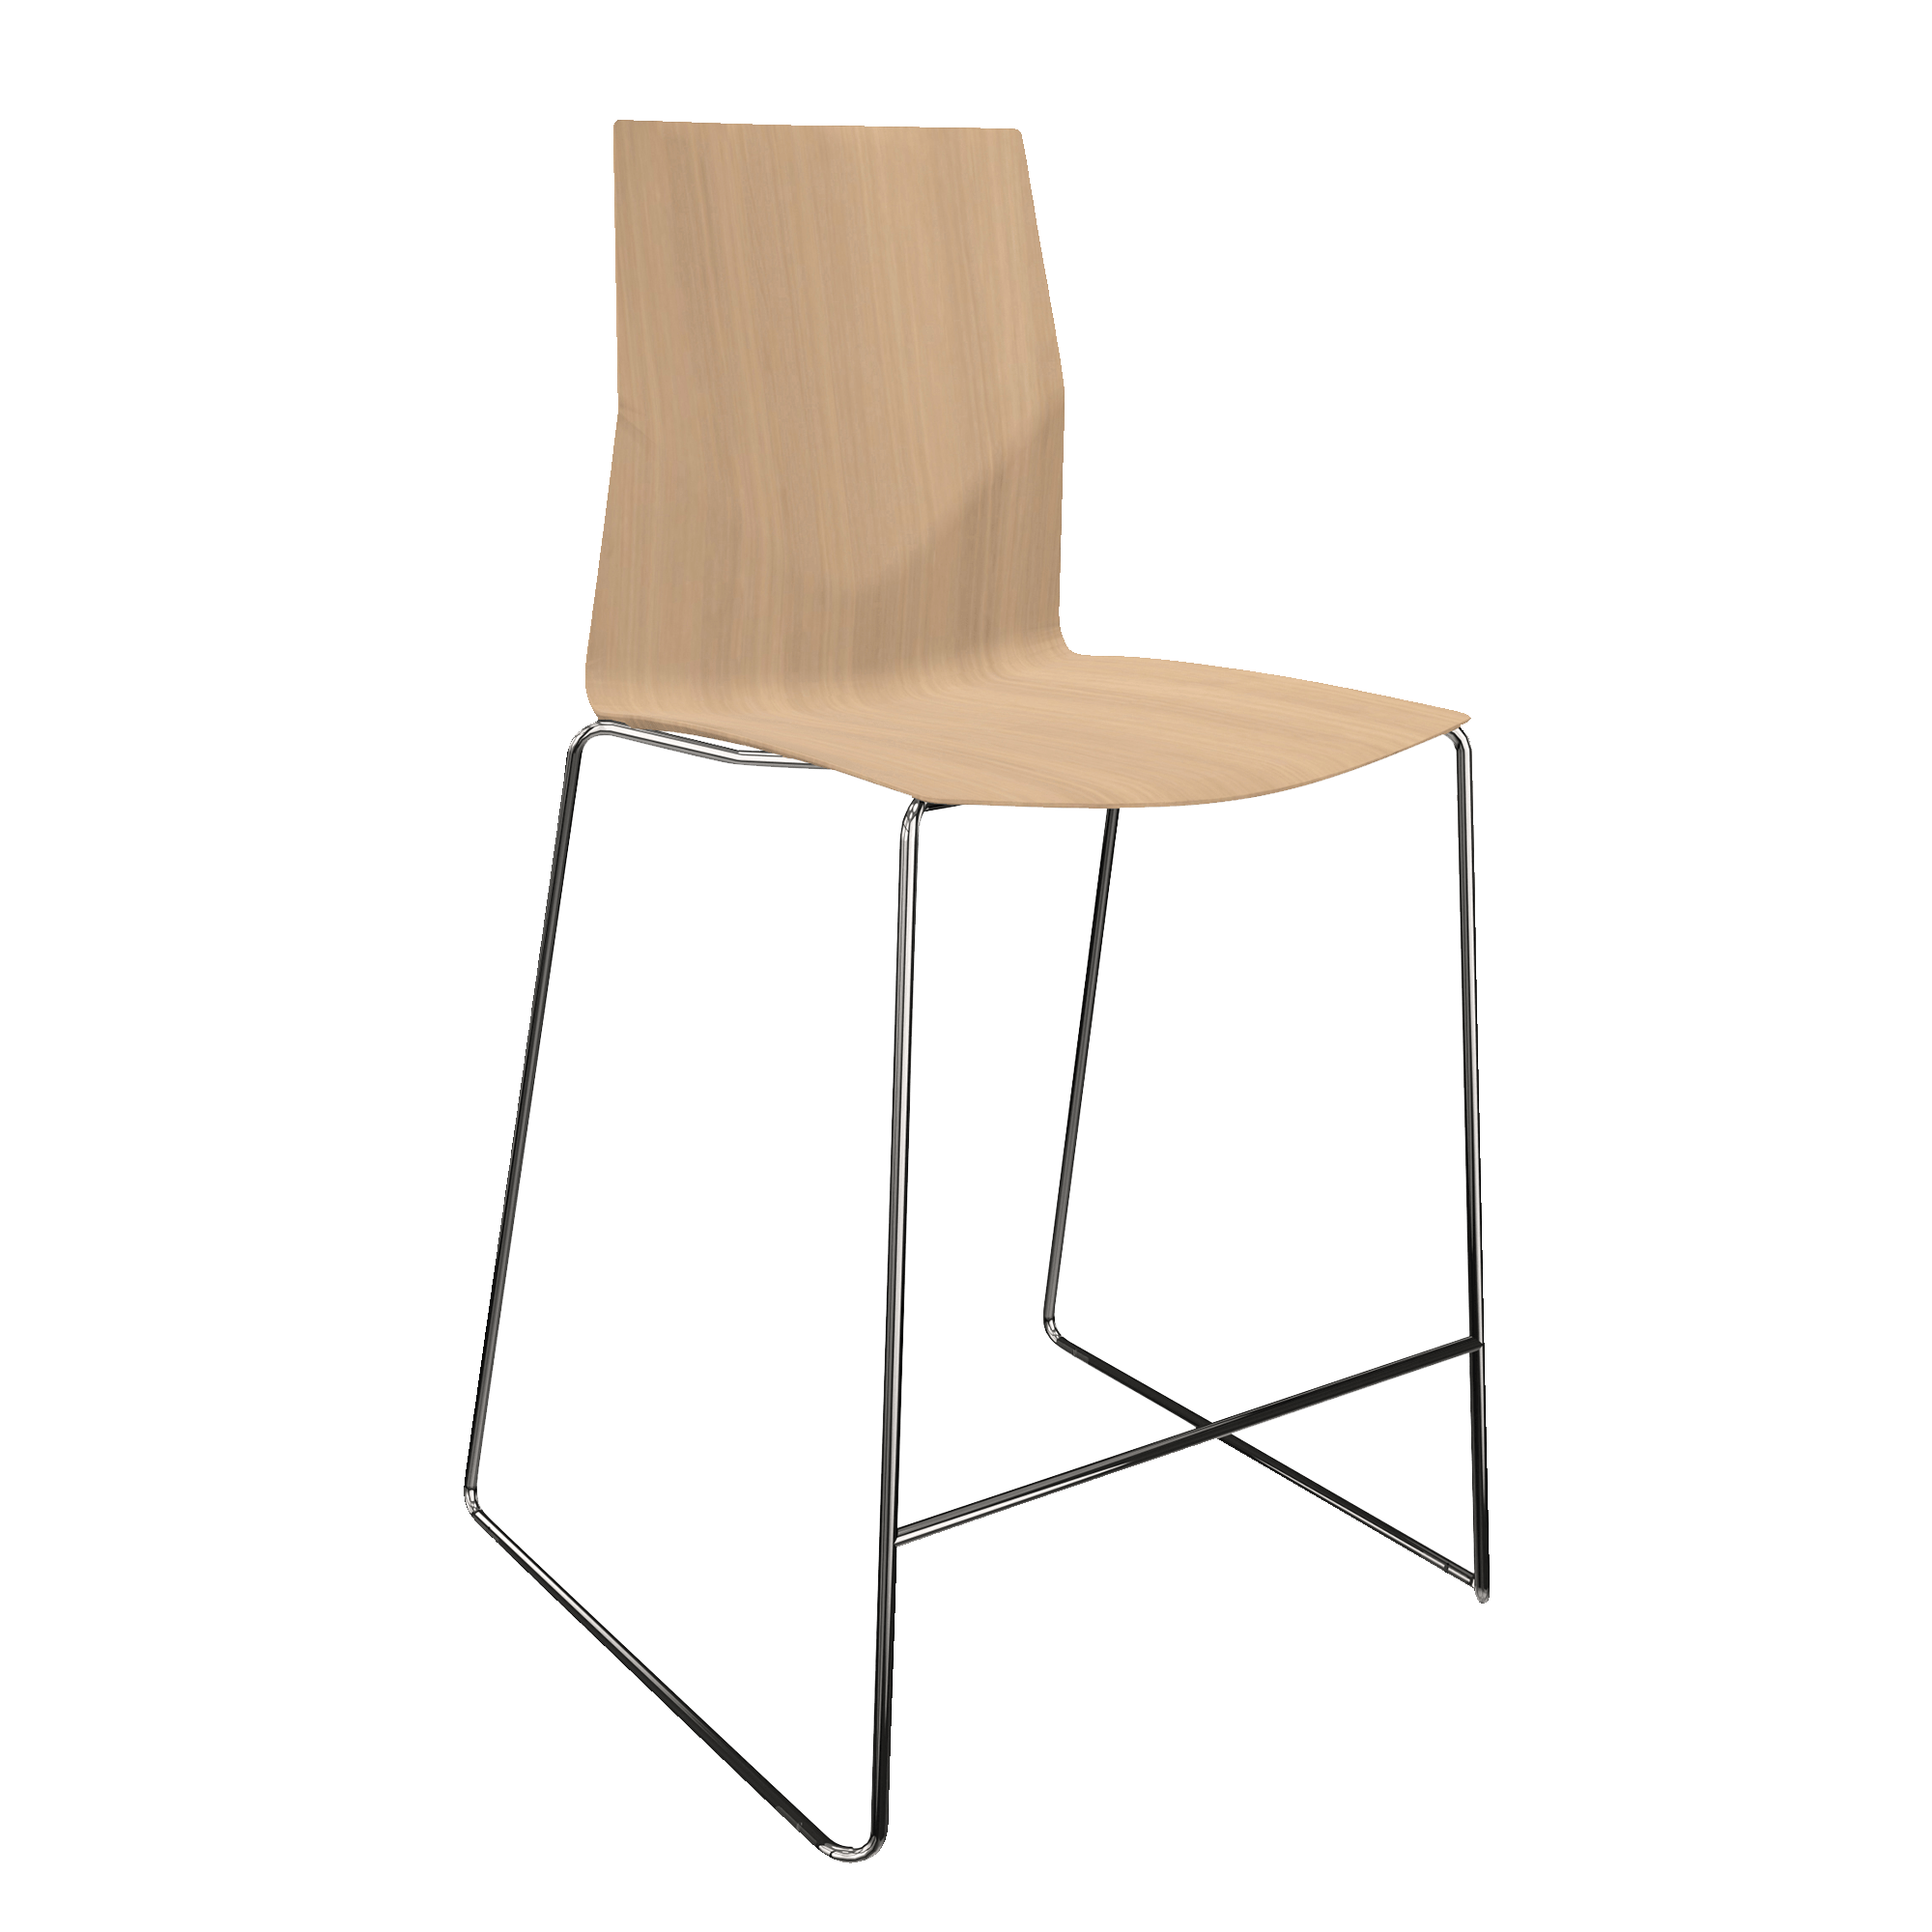 wooden counter chair with metal legs